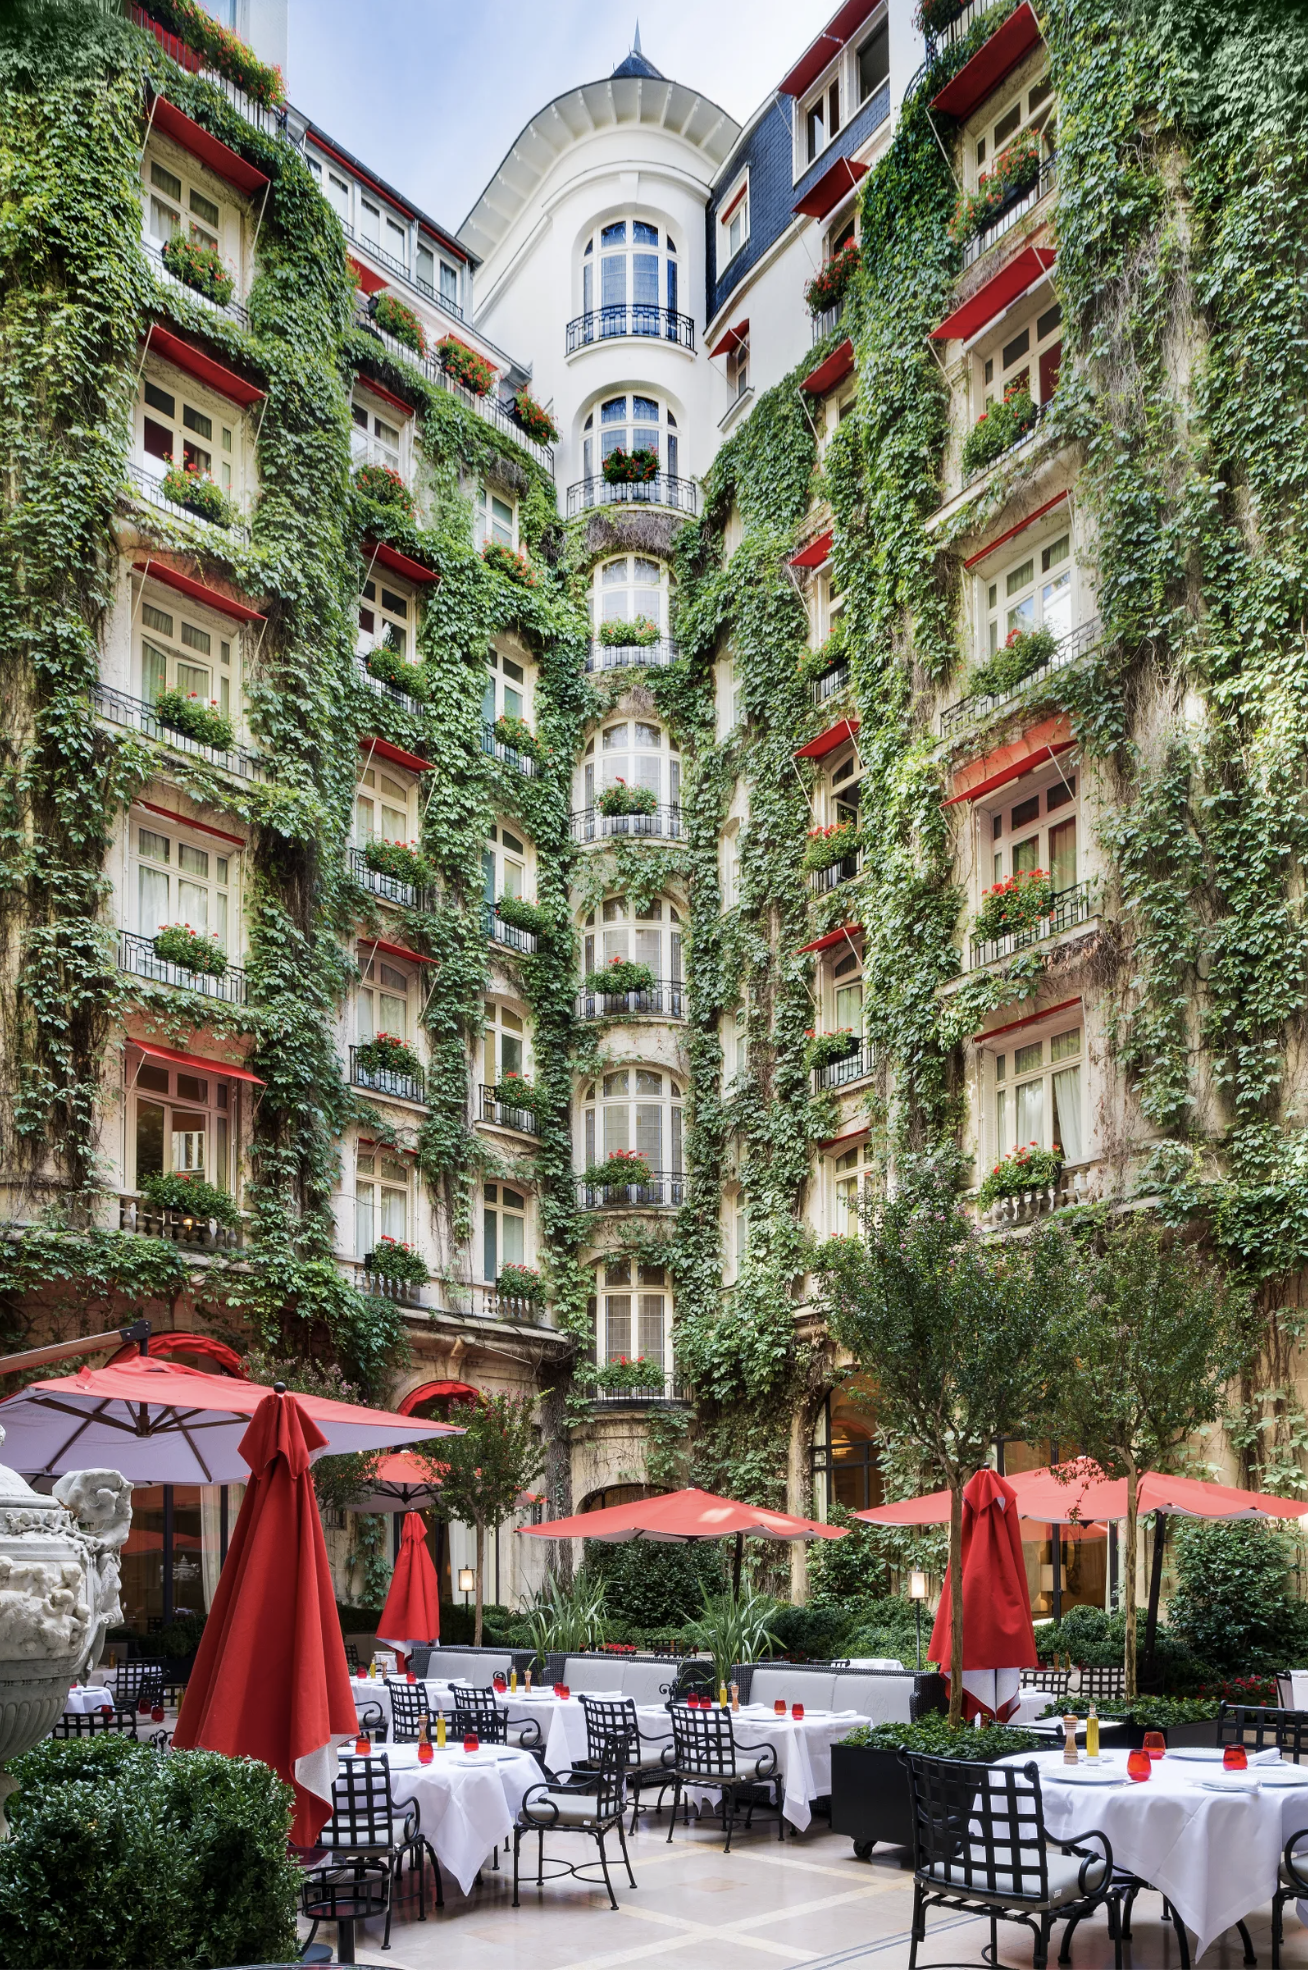 The hidden courtyard garden restaurant of Hotel Plaza Athénée with its ivy-covered walls spanning 8 stories and crisp white linen tables beneath bold red parasols